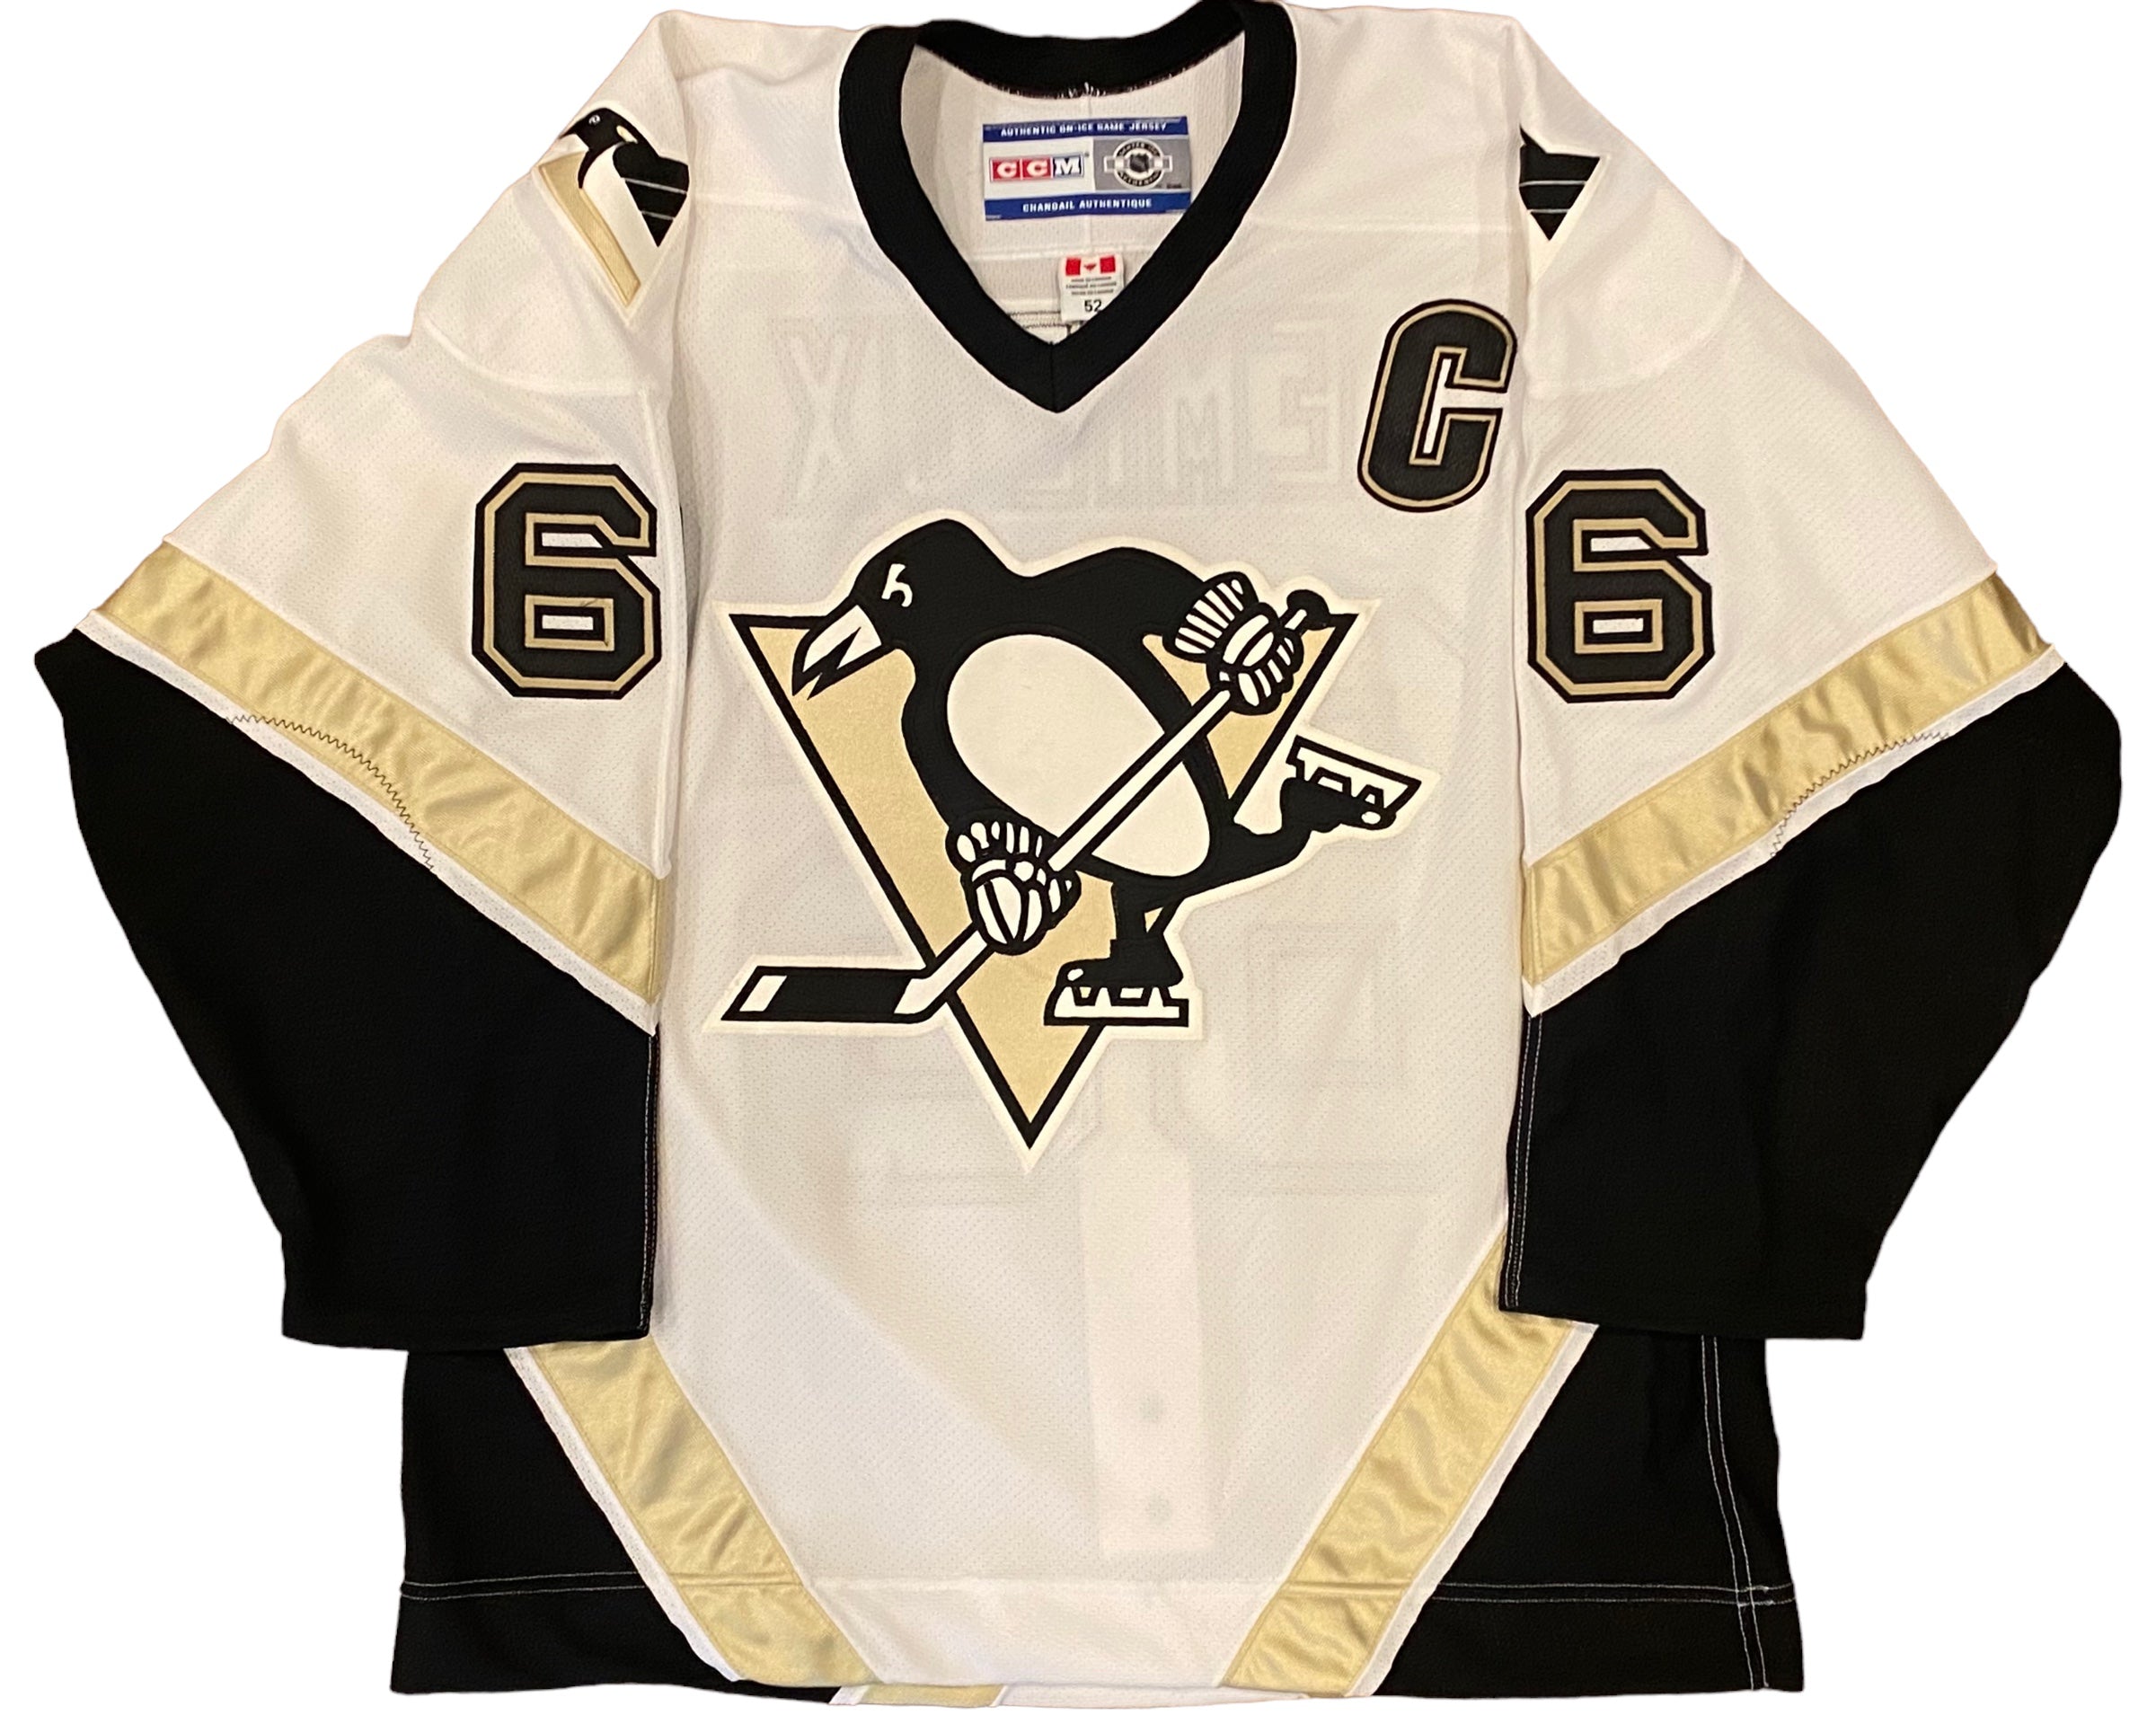 Mario Lemieux Signed, Inscribed 5 Goals 4/9/1993 Pittsburgh Penguins  Authentic 1993 Starter Jersey - Size 52